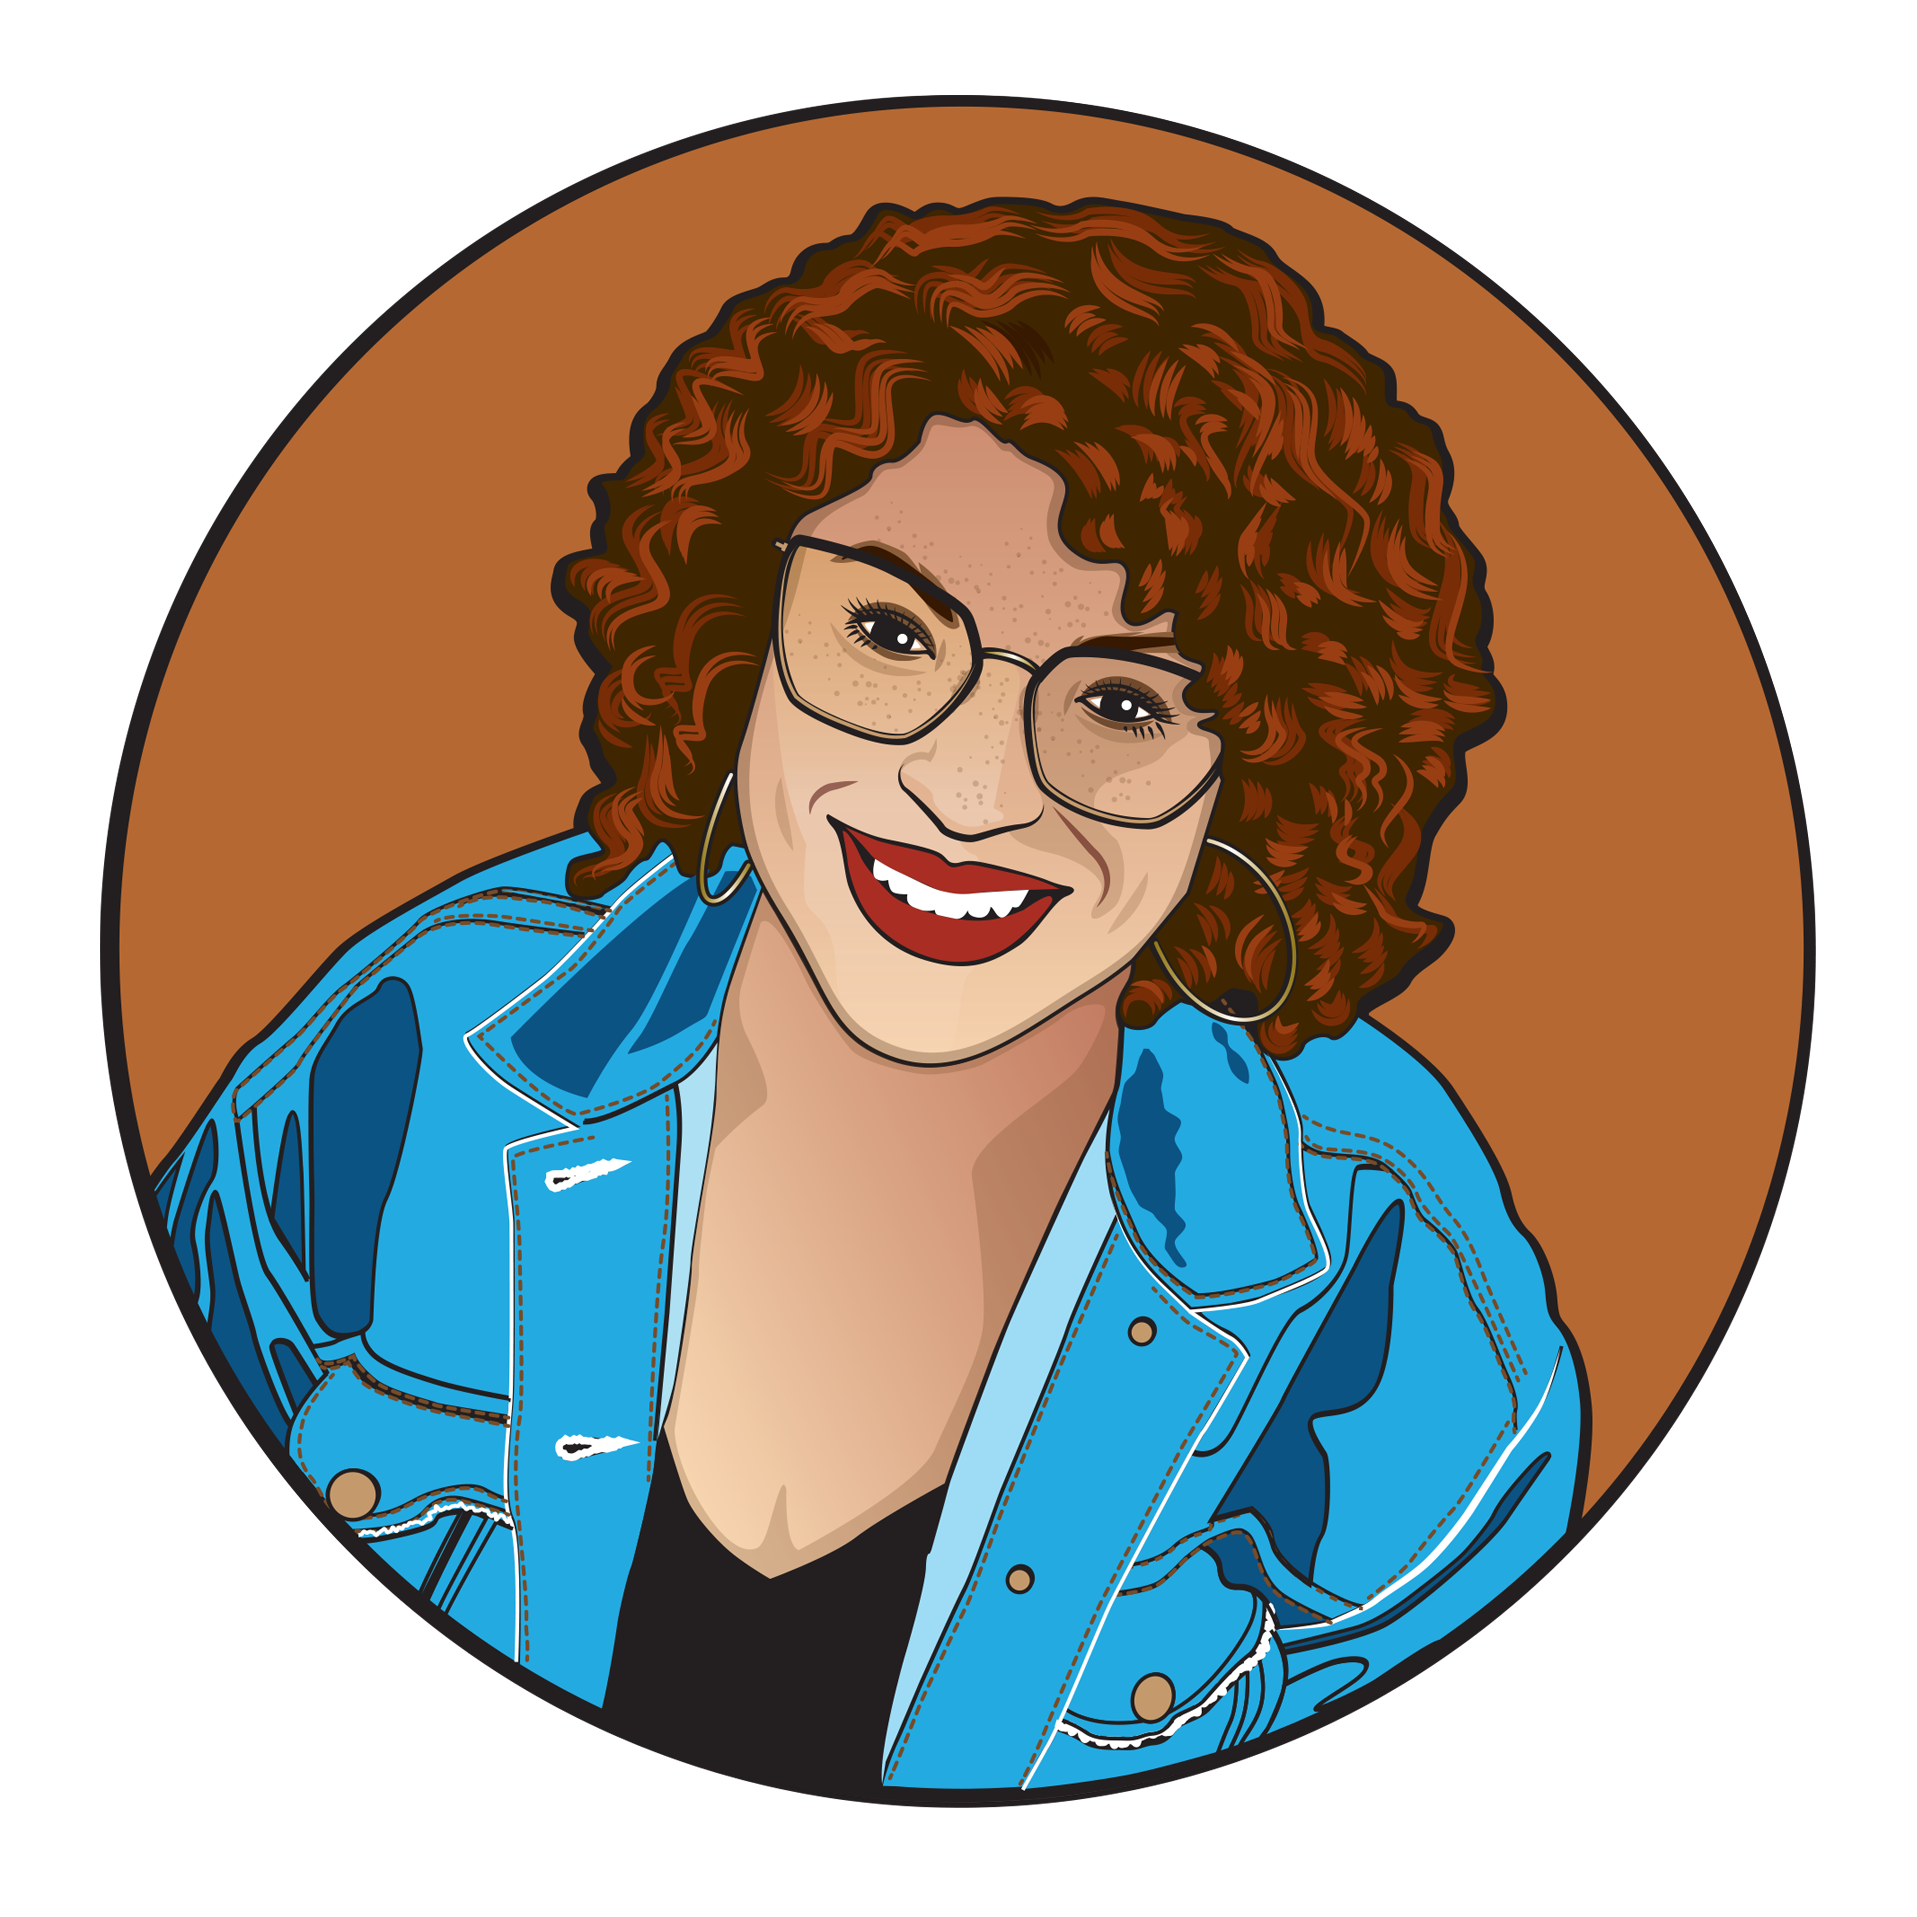 Illustrated image of Nikki, a lighter skinned woman with red hair and freckles. She is wearing black rimmed glasses, a jean jacket, a black t-shirt, and silver hoop earrings. Her image is on an orange background.